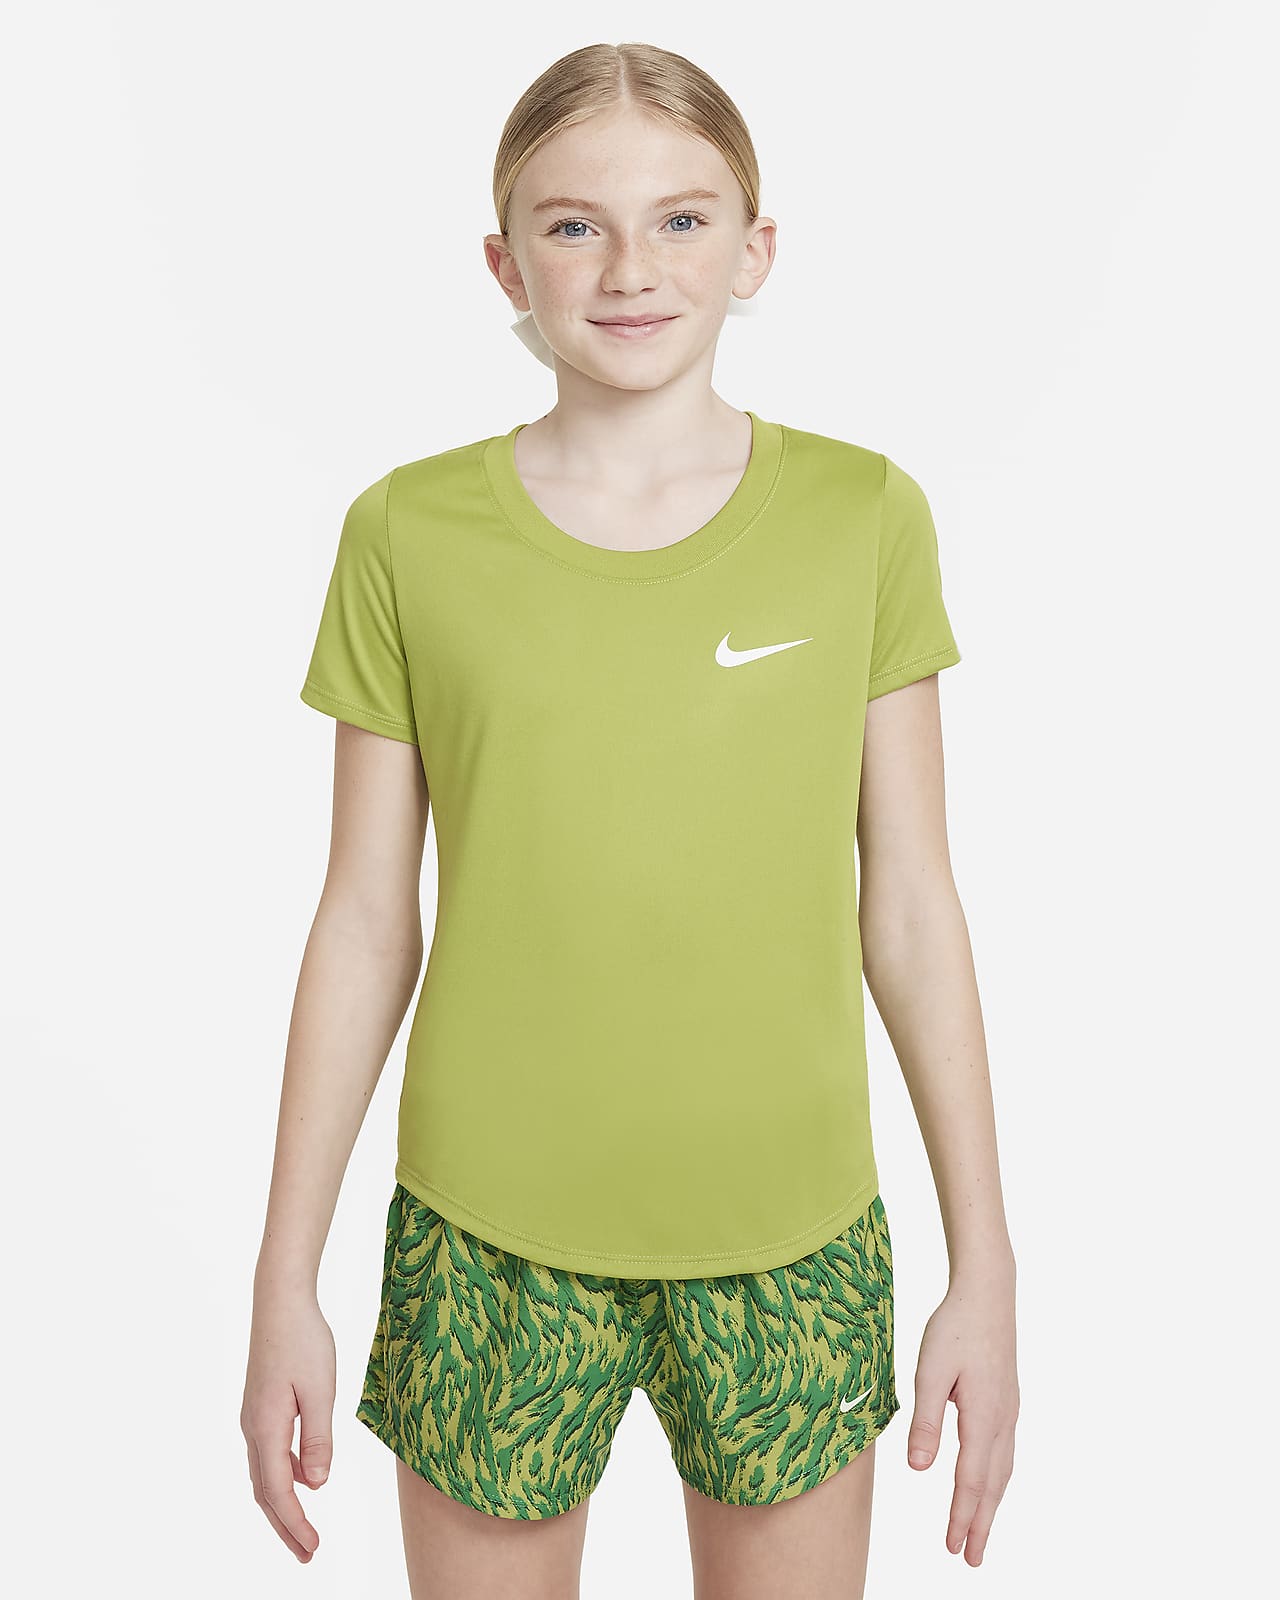 Girl's T-shirt Nike Trend BF Print - T-shirts and polos - Textile